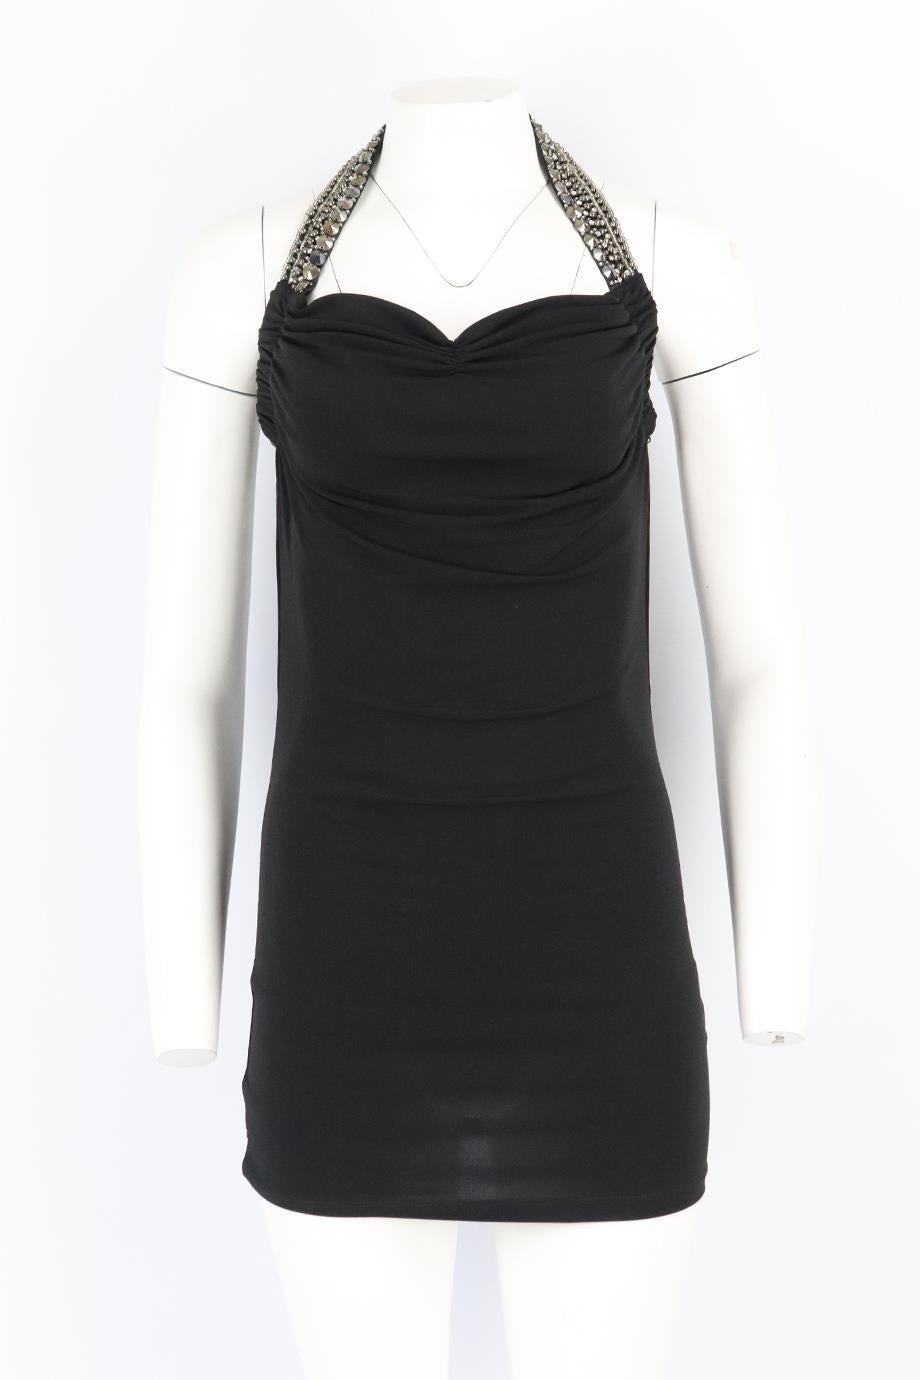 Philipp Plein embellished cutout ruched stretch jersey mini dress. Black. Sleeveless, cowl neck. Slips on. 100% Polyester. Size: Small (UK 8, US 4, FR 36, IT 40). Bust: 28 in. Waist: 28 in. Hips: 31 in. Length: 30 in. Very good condition - Some